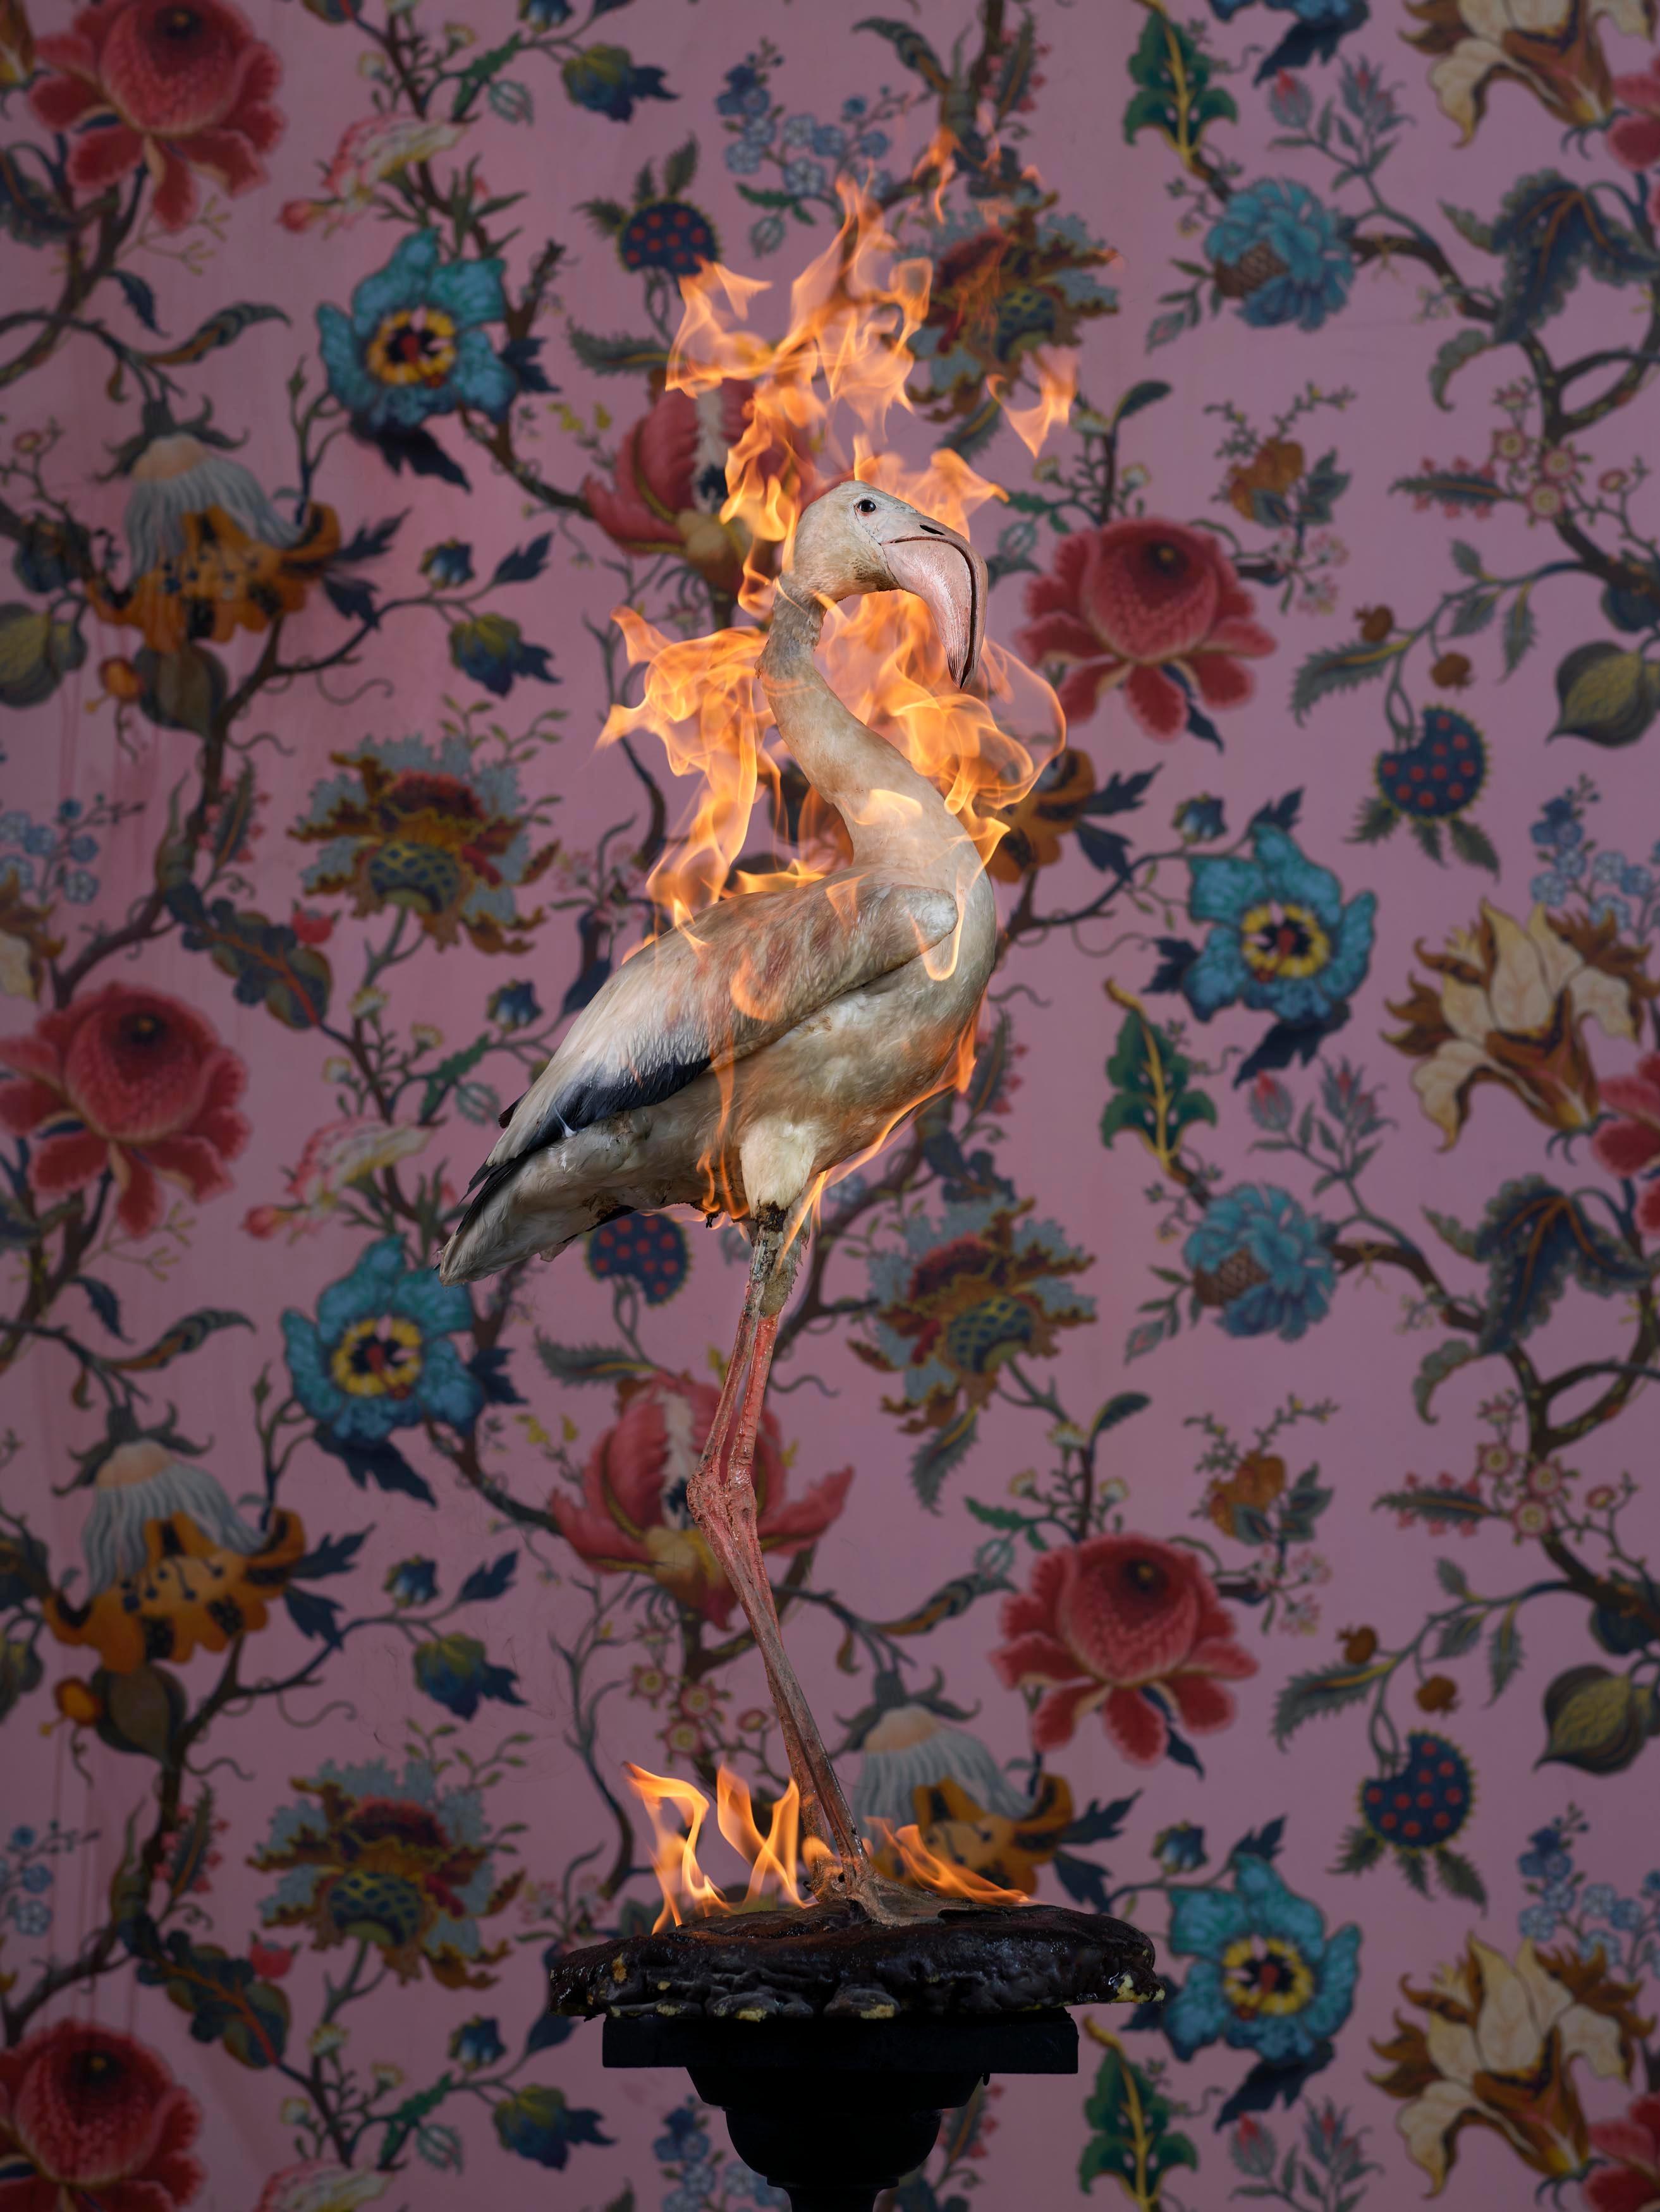 Christian Houge Figurative Photograph - `Flamingo`, Oslo- `Residence of Impermanence`- bird taxidermy nature animal fire